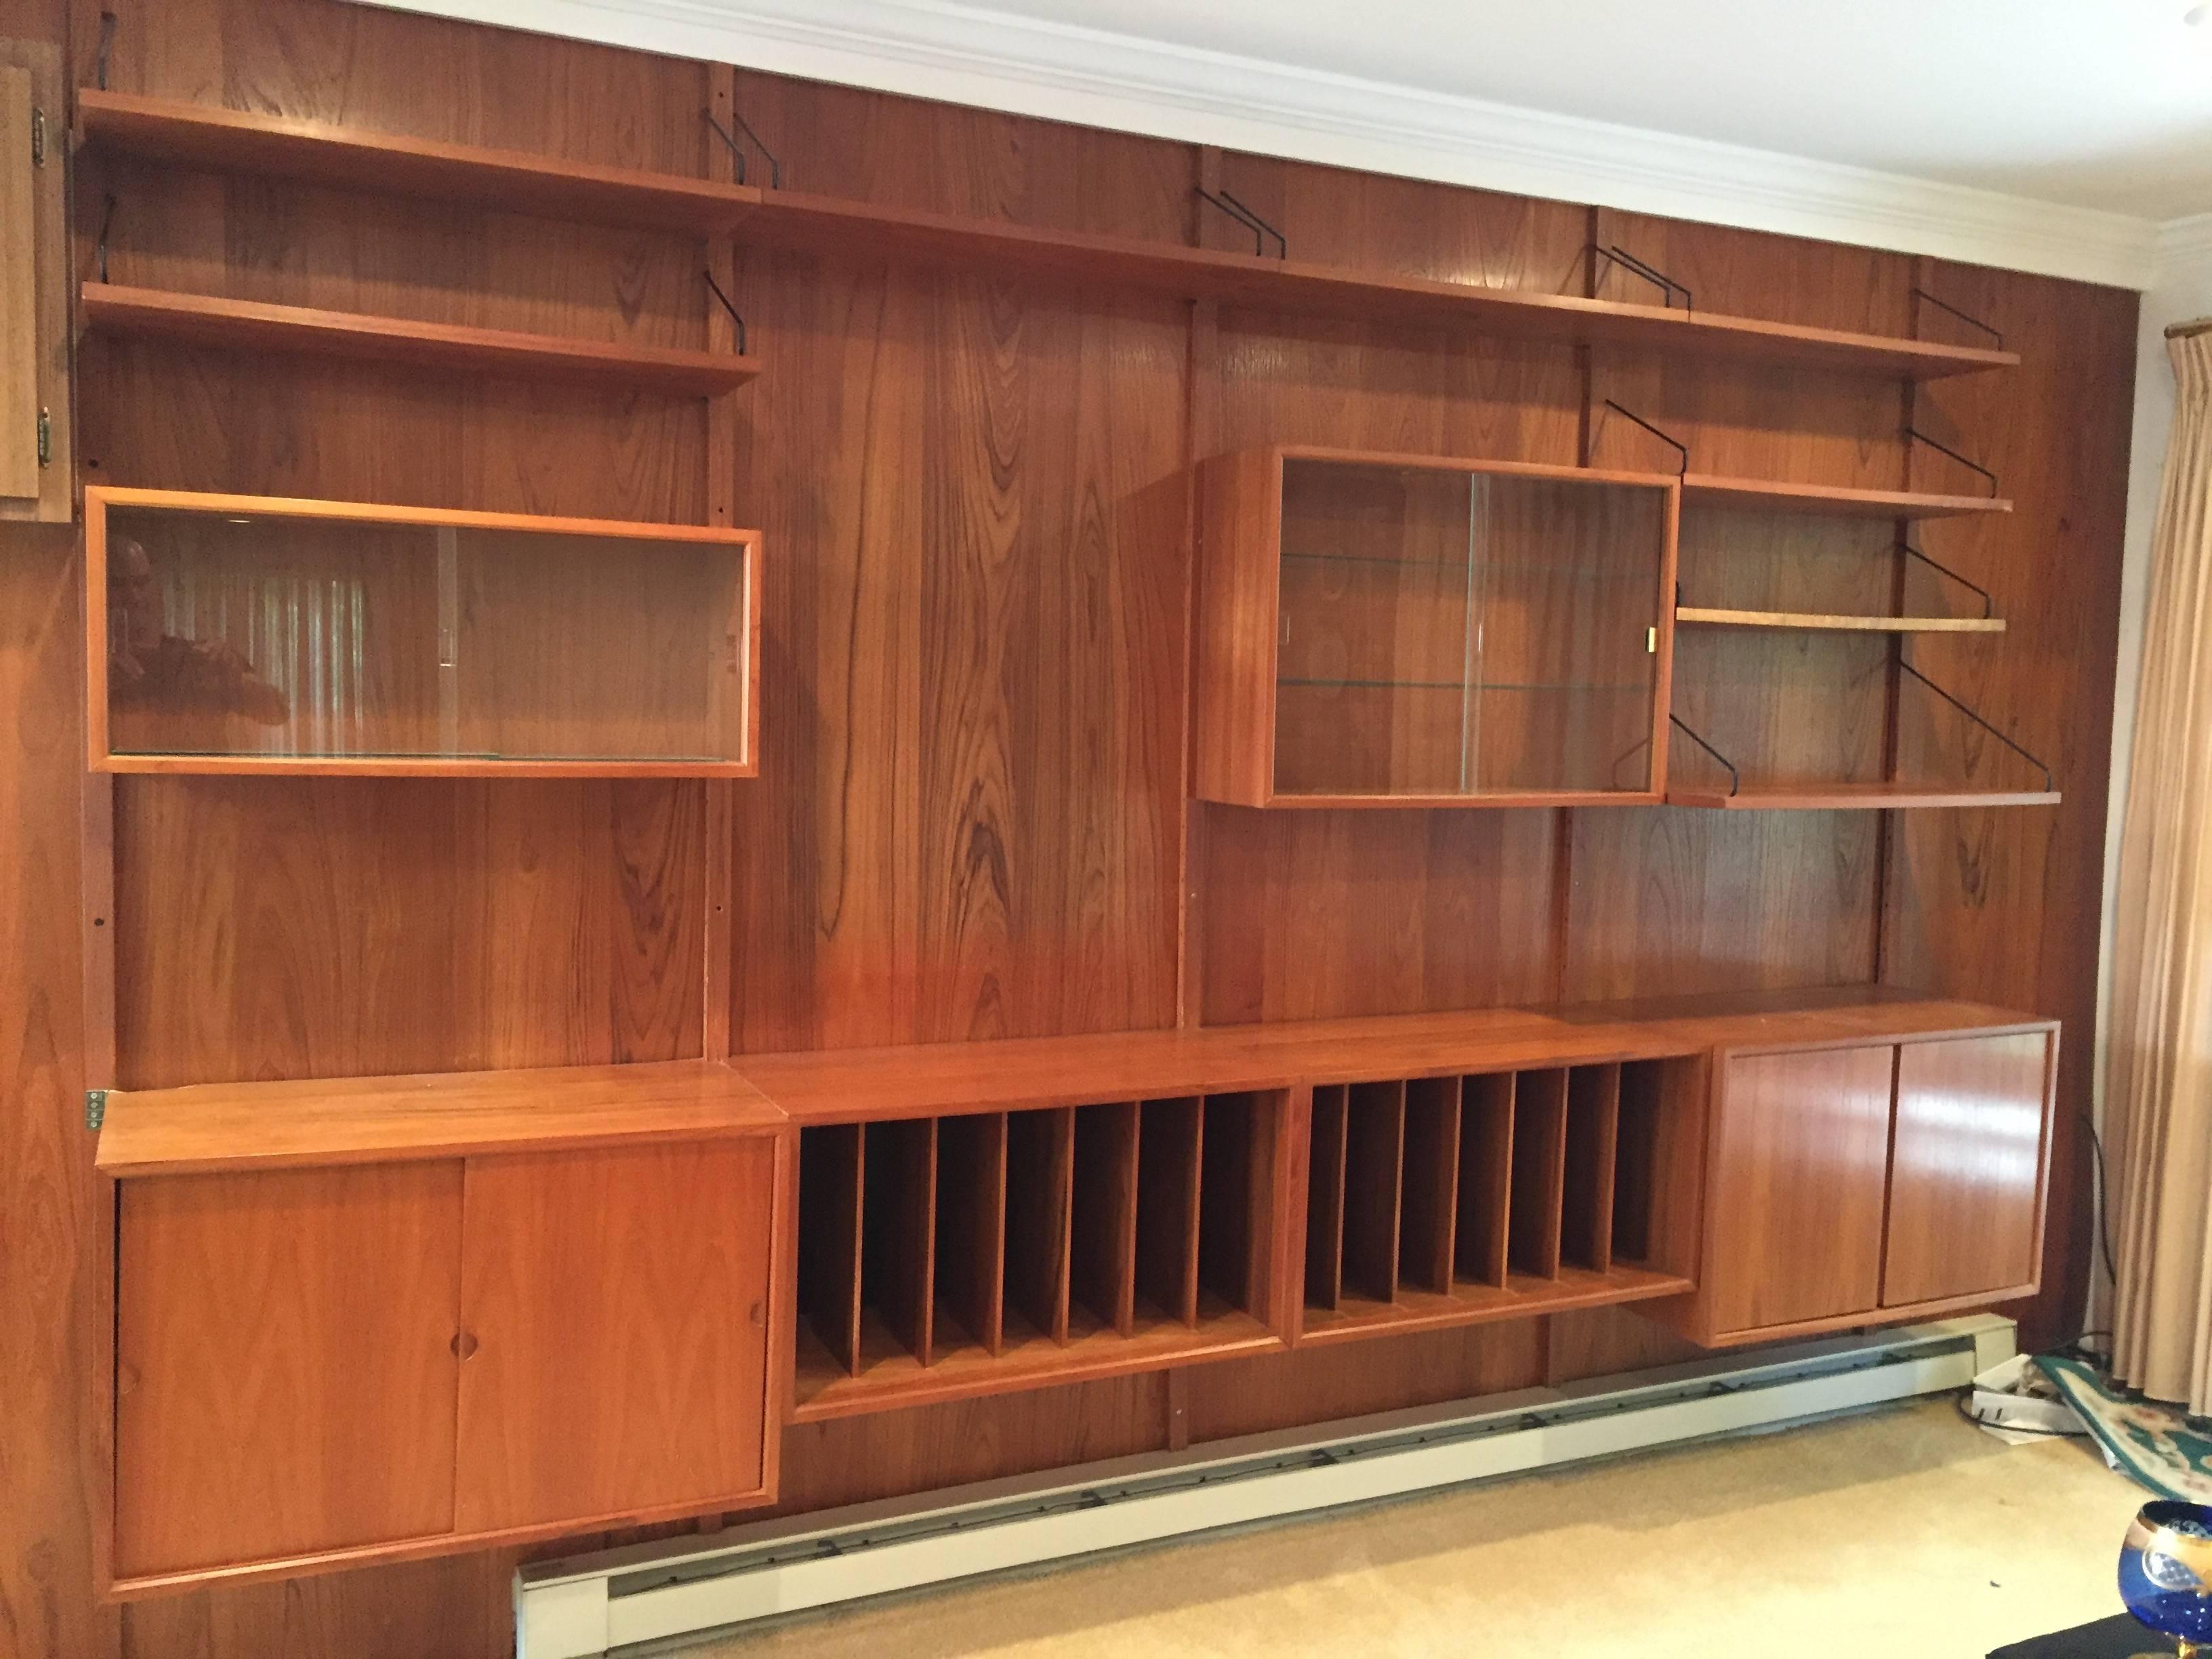 Series of teak shelves and cabinets designed by Poul Cadovius for Royal System, Inc., Denmark. These shelving units are wonderful space savers and can be mixed and matched and re-arranged for all your storage needs. This system contains 8 shelves,